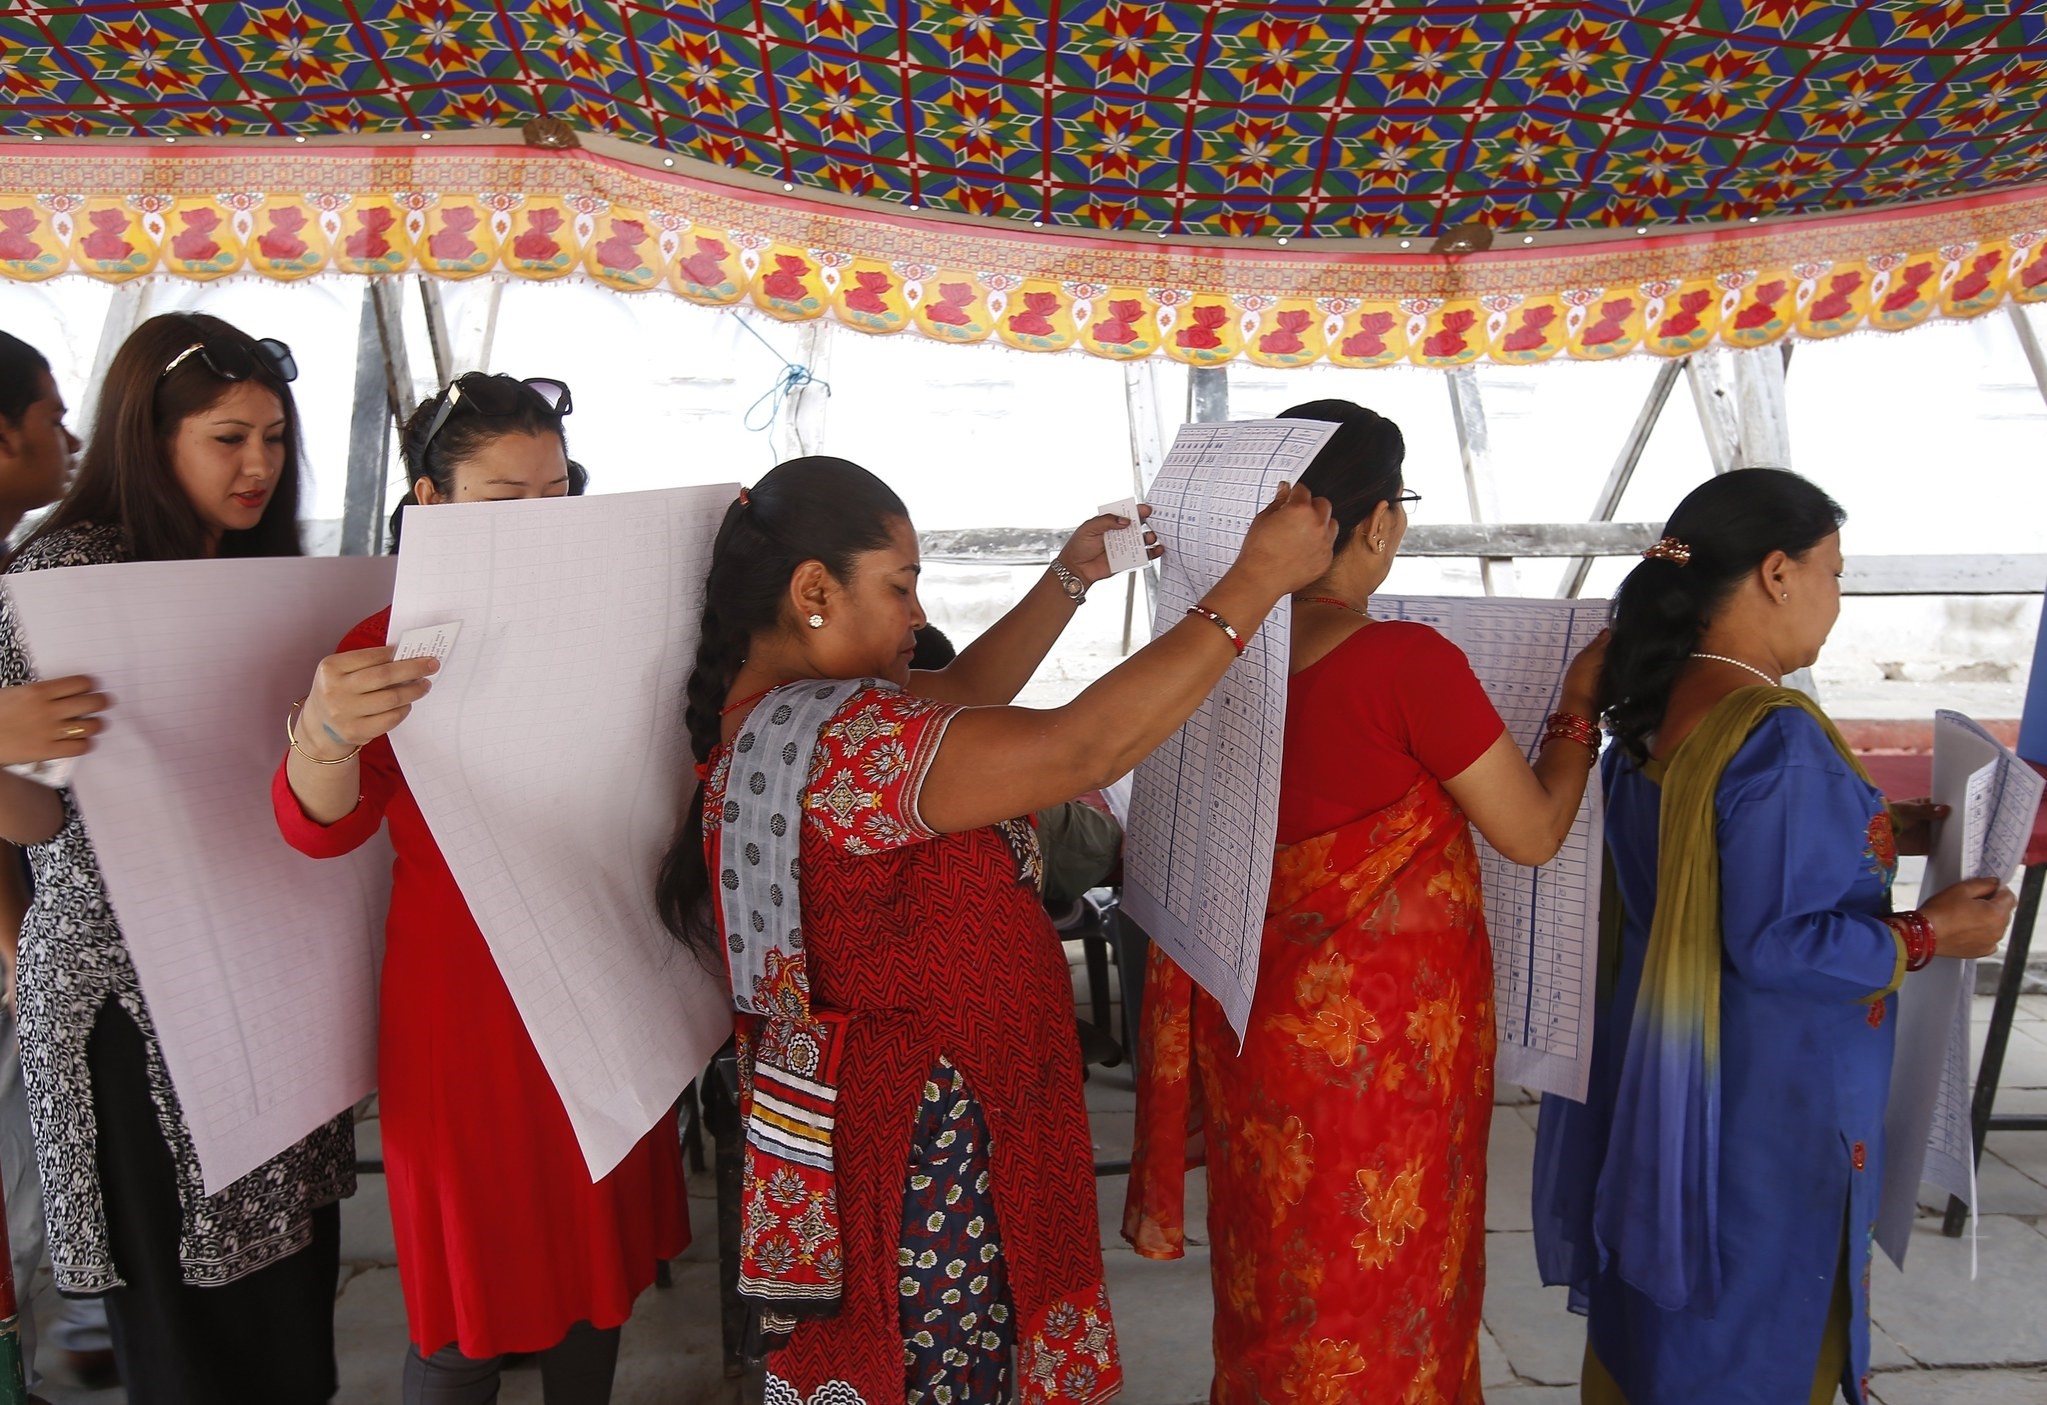 Nepalese women read polling information prior to casting their ballot at a polling station in Kathmandu Durbar Square in Kathmandu, Nepal, 14 May 2017. (EPA Photo)